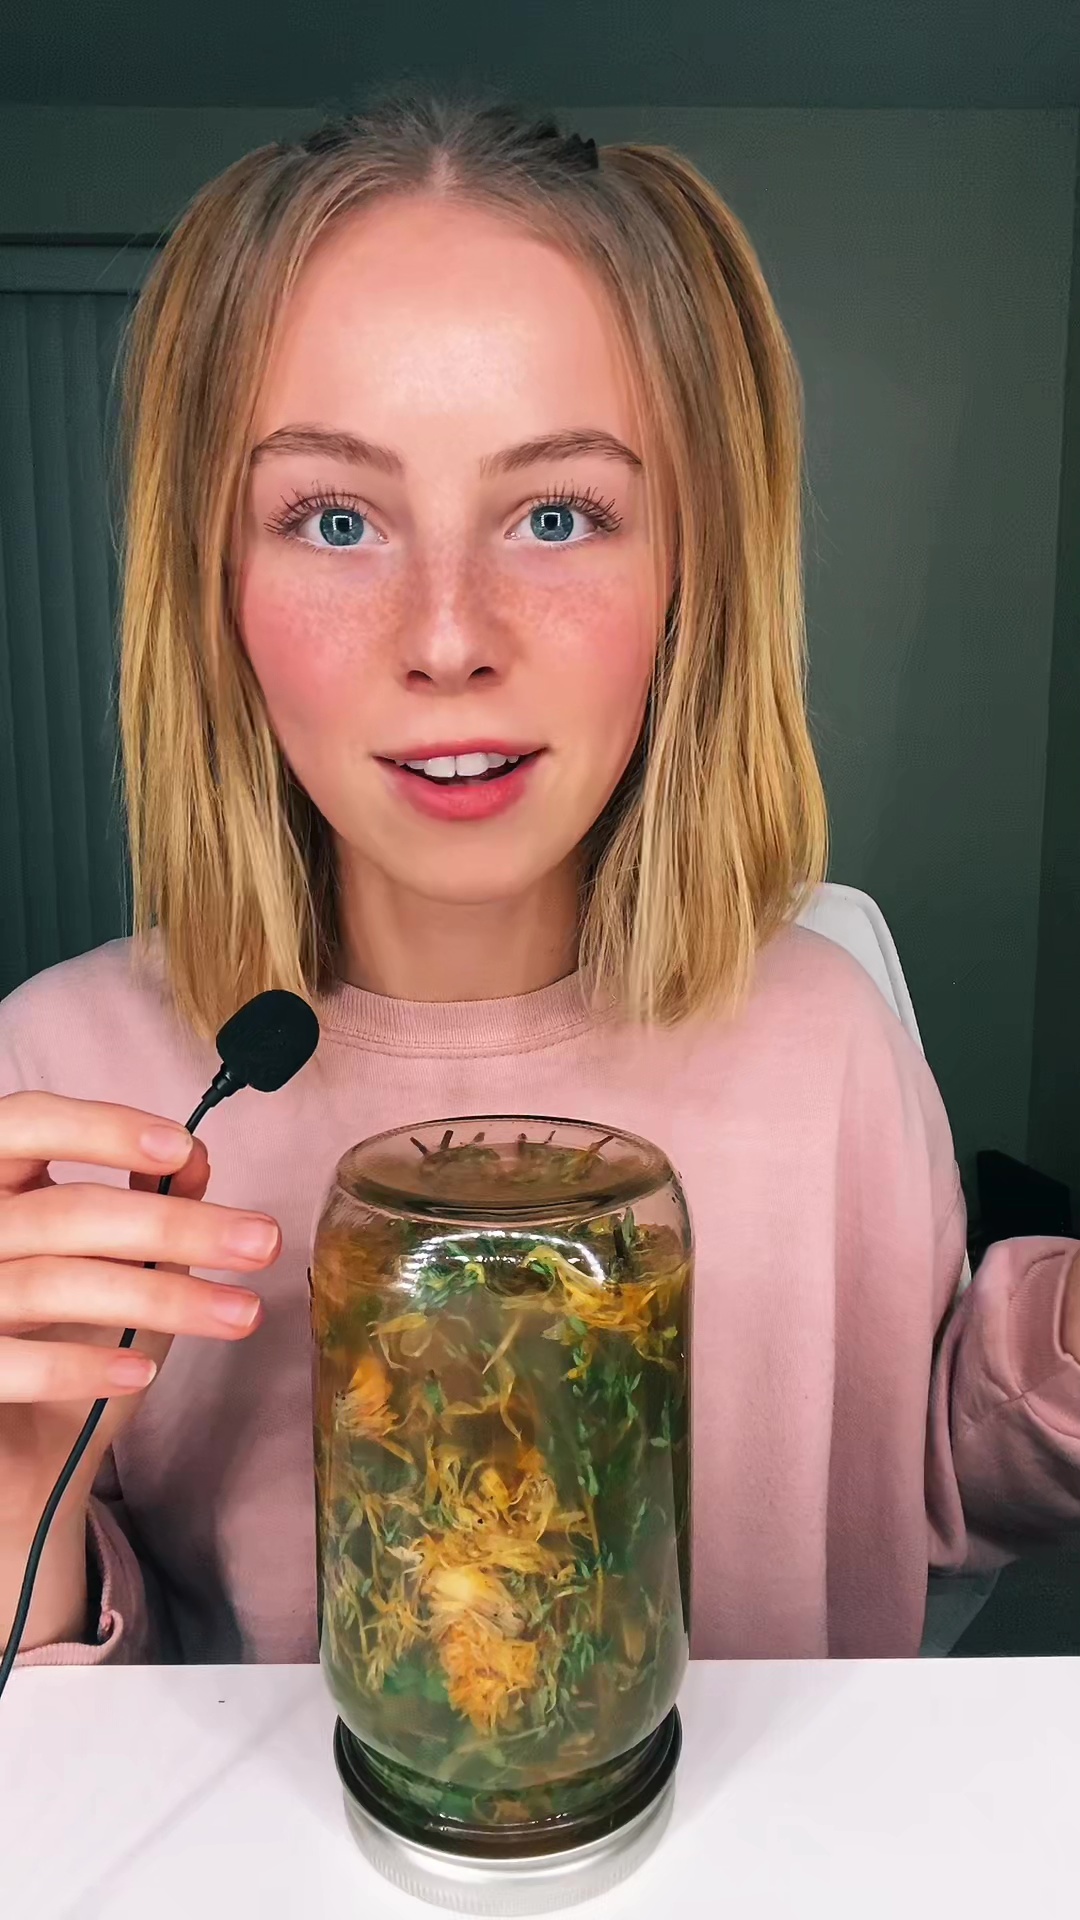 She uses a pickled concoction that brews for six weeks to clean her locks instead